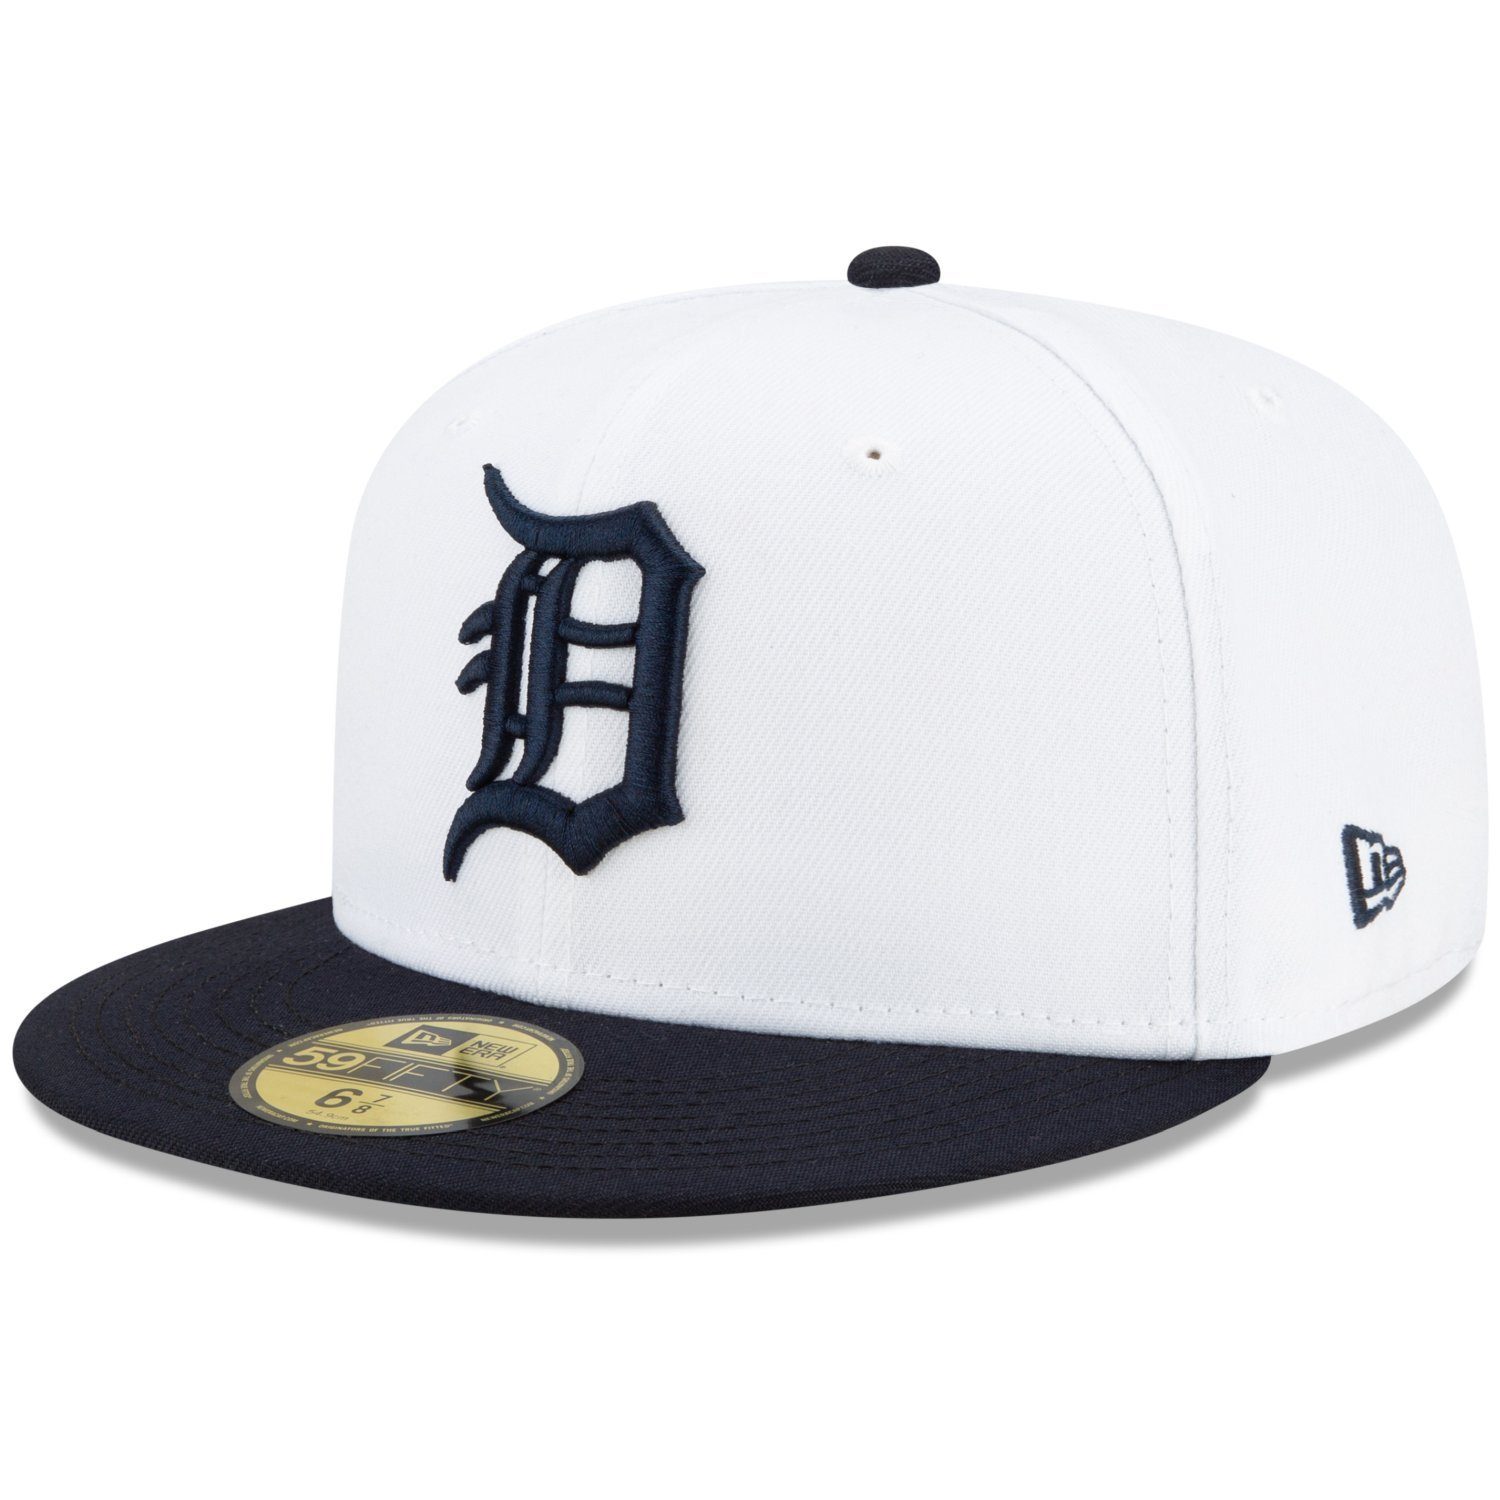 New Era Fitted 59Fifty Tigers SERIES 1984 Cap Detroit WORLD